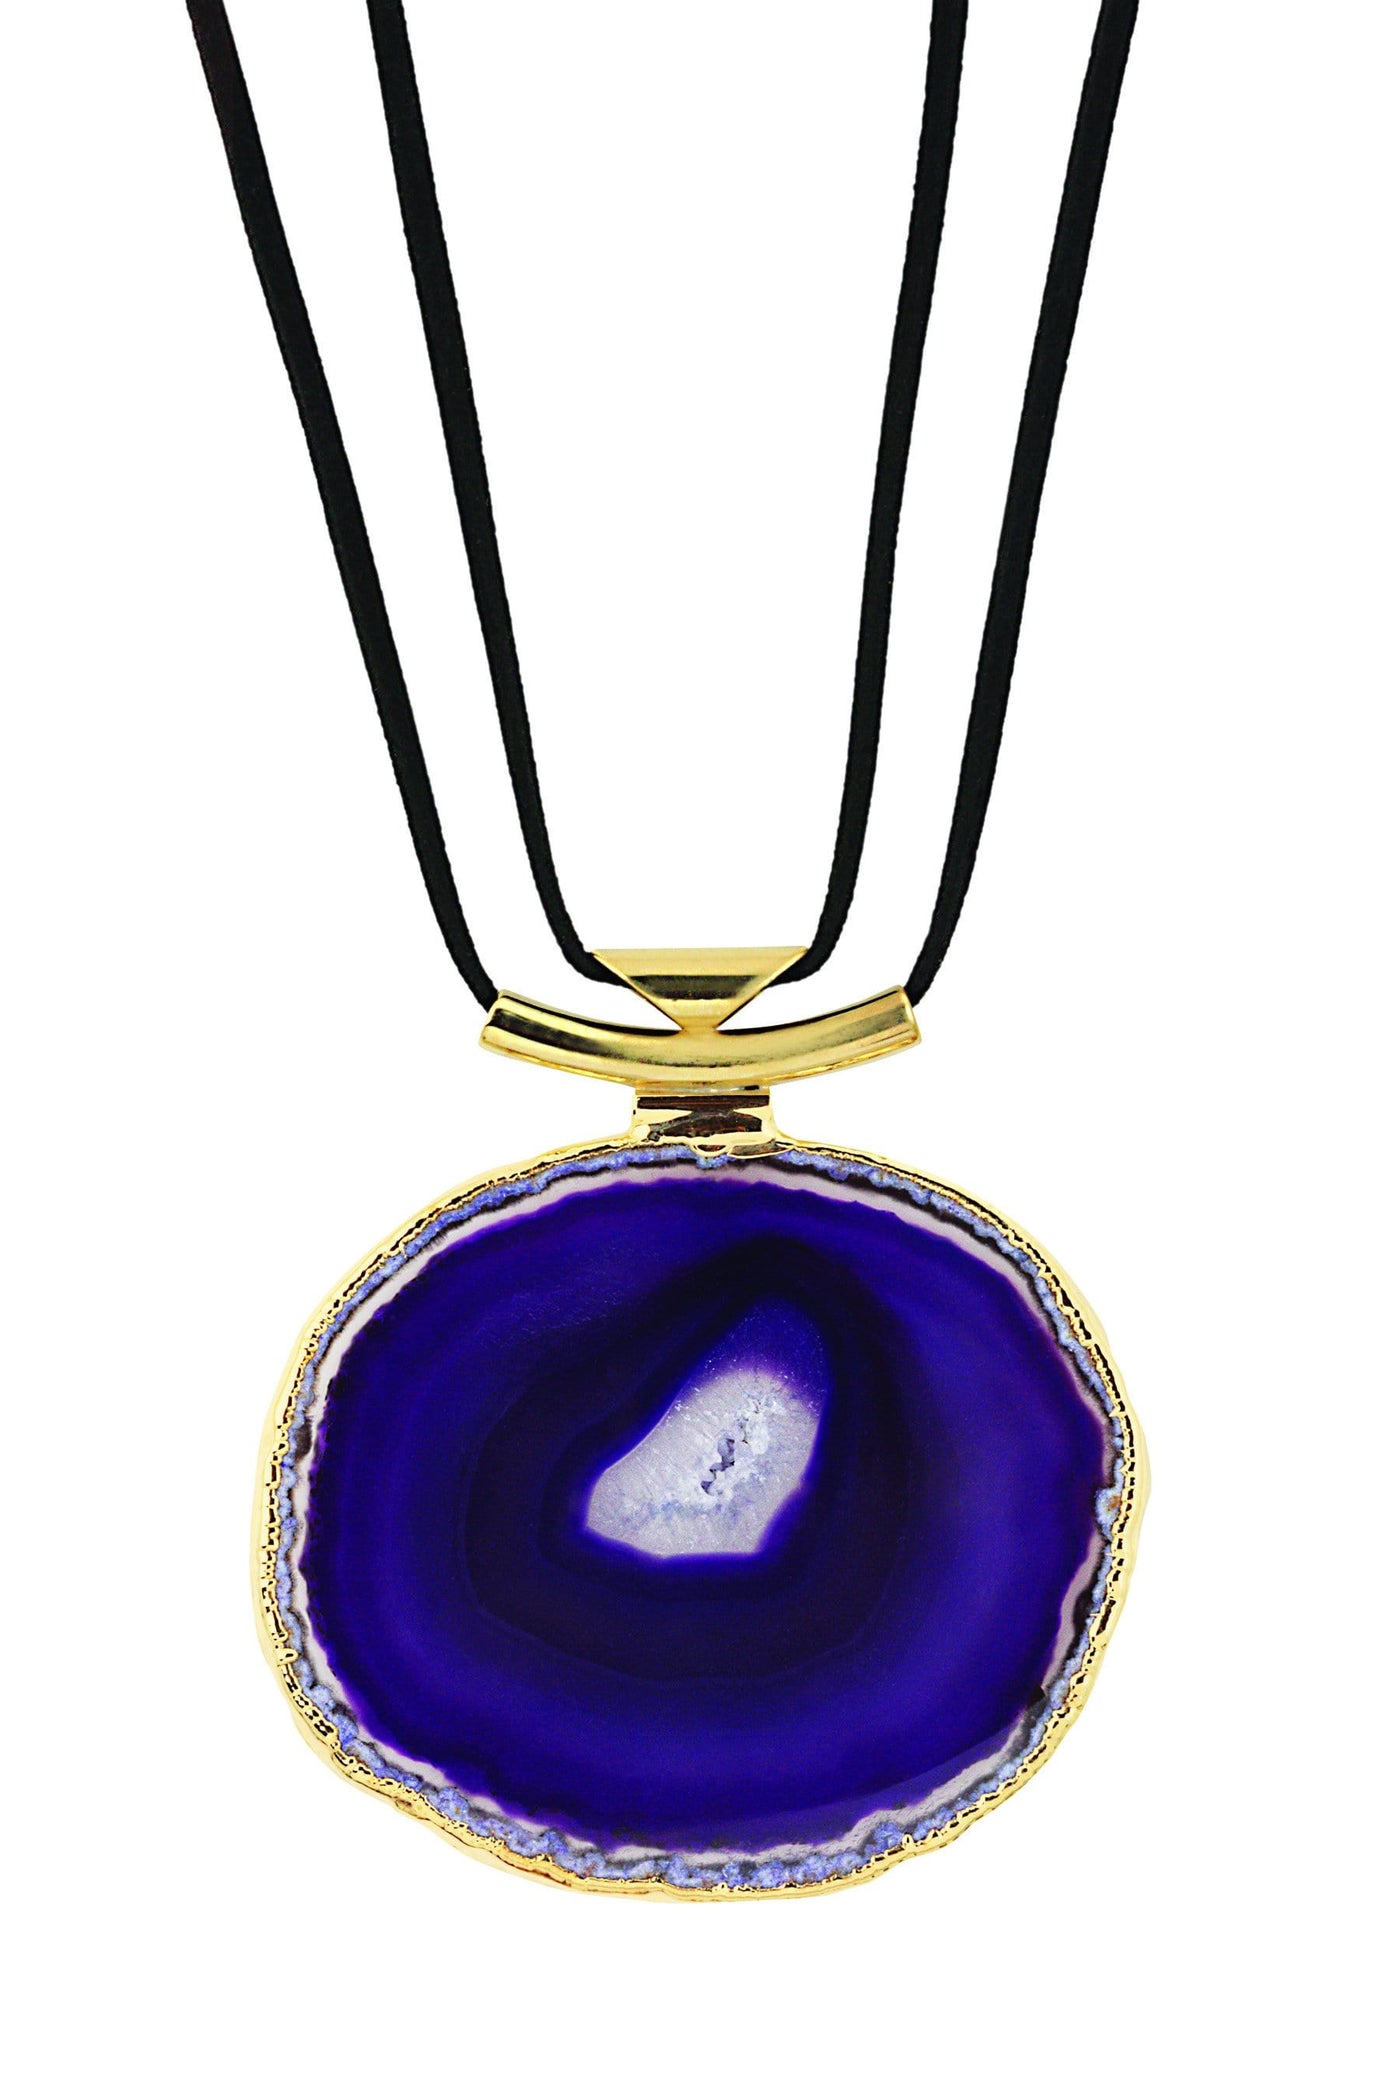 A purple agate necklace with black leather cord and gold bail with a white background.